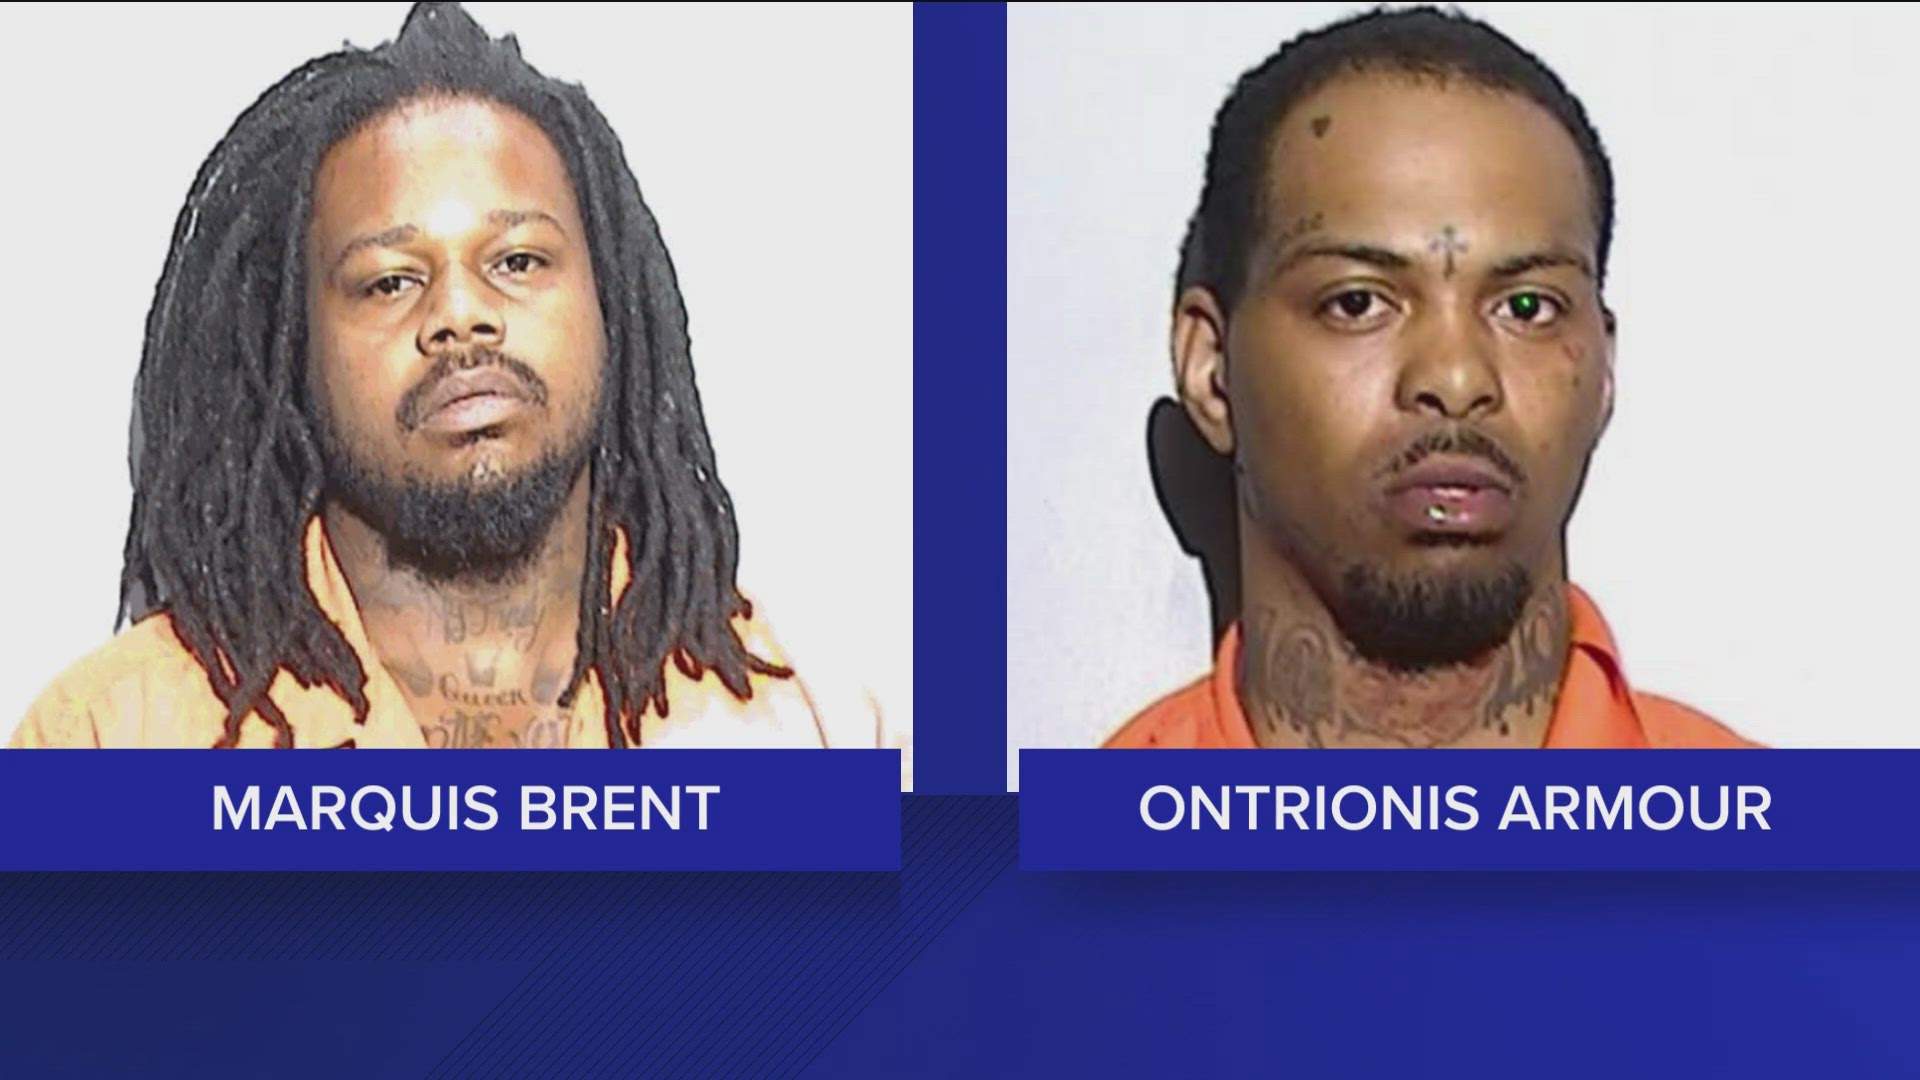 Ontrionis Armour and Marquise Brent were indicted on multiple charges Monday, including murder. Armour is not in custody.